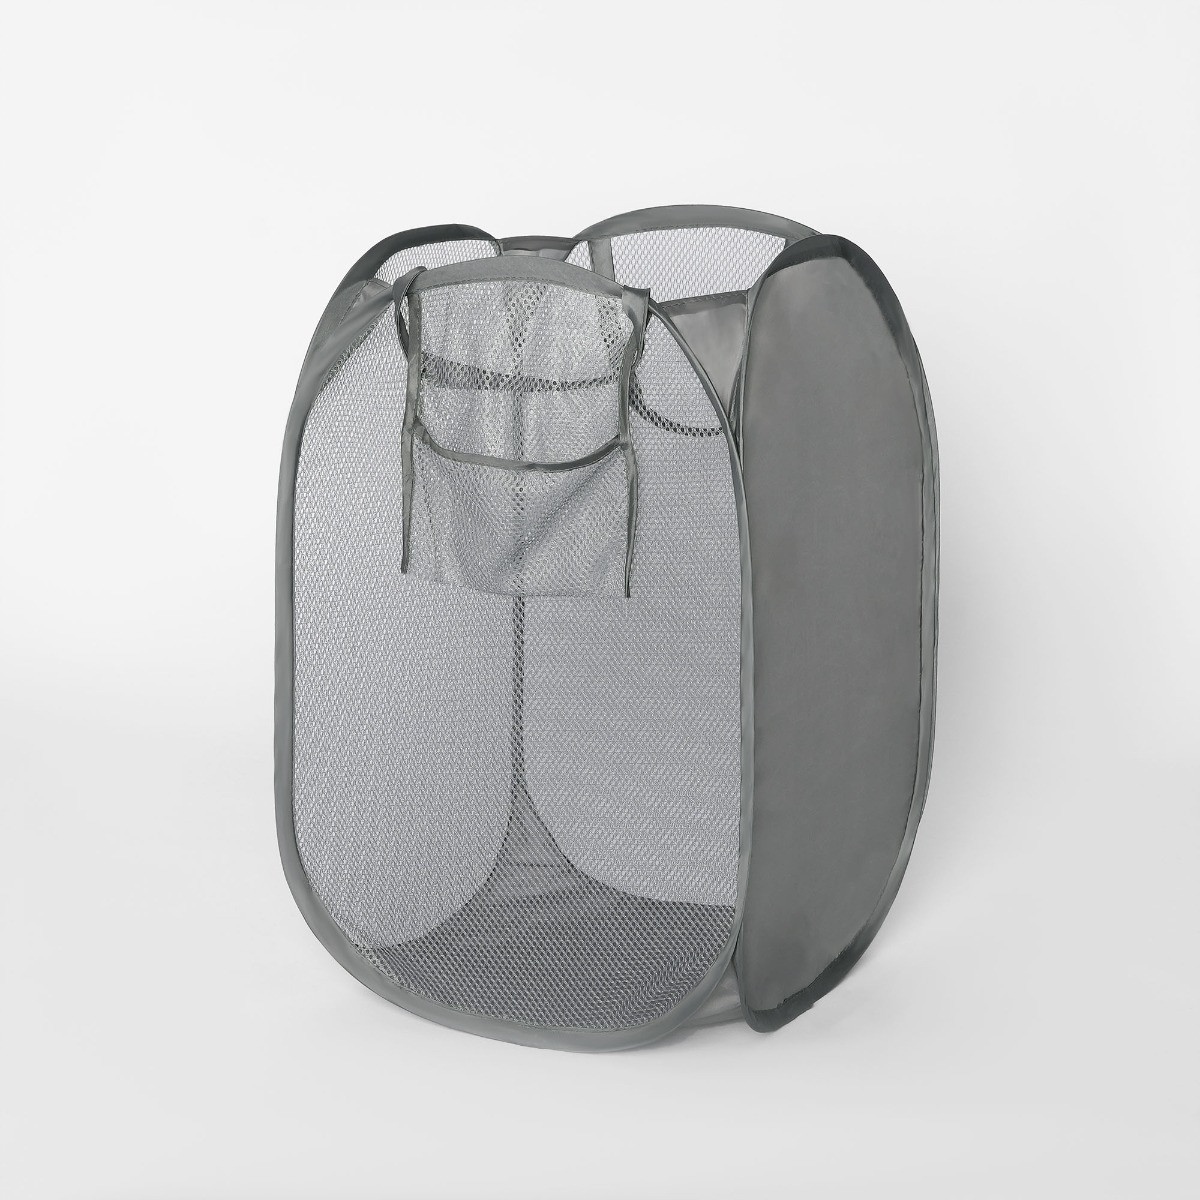 OHS Pop Up Laundry Basket - Charcoal>